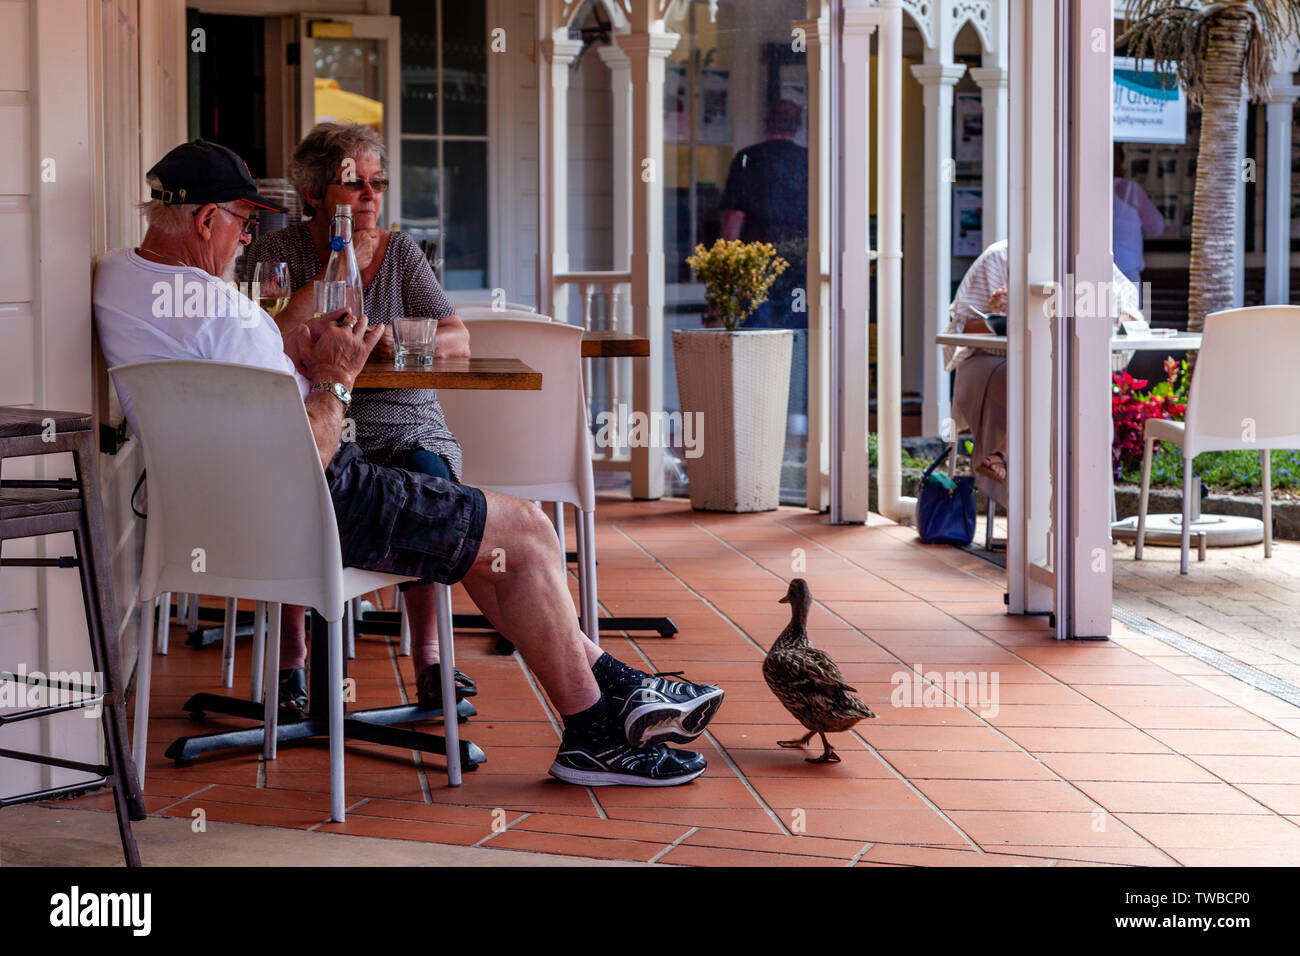 A Senior Couple Sitting At A Cafe As A Duck Walks By, The Town Basin, Whangarei, North Island, New Zealand Stock Photo